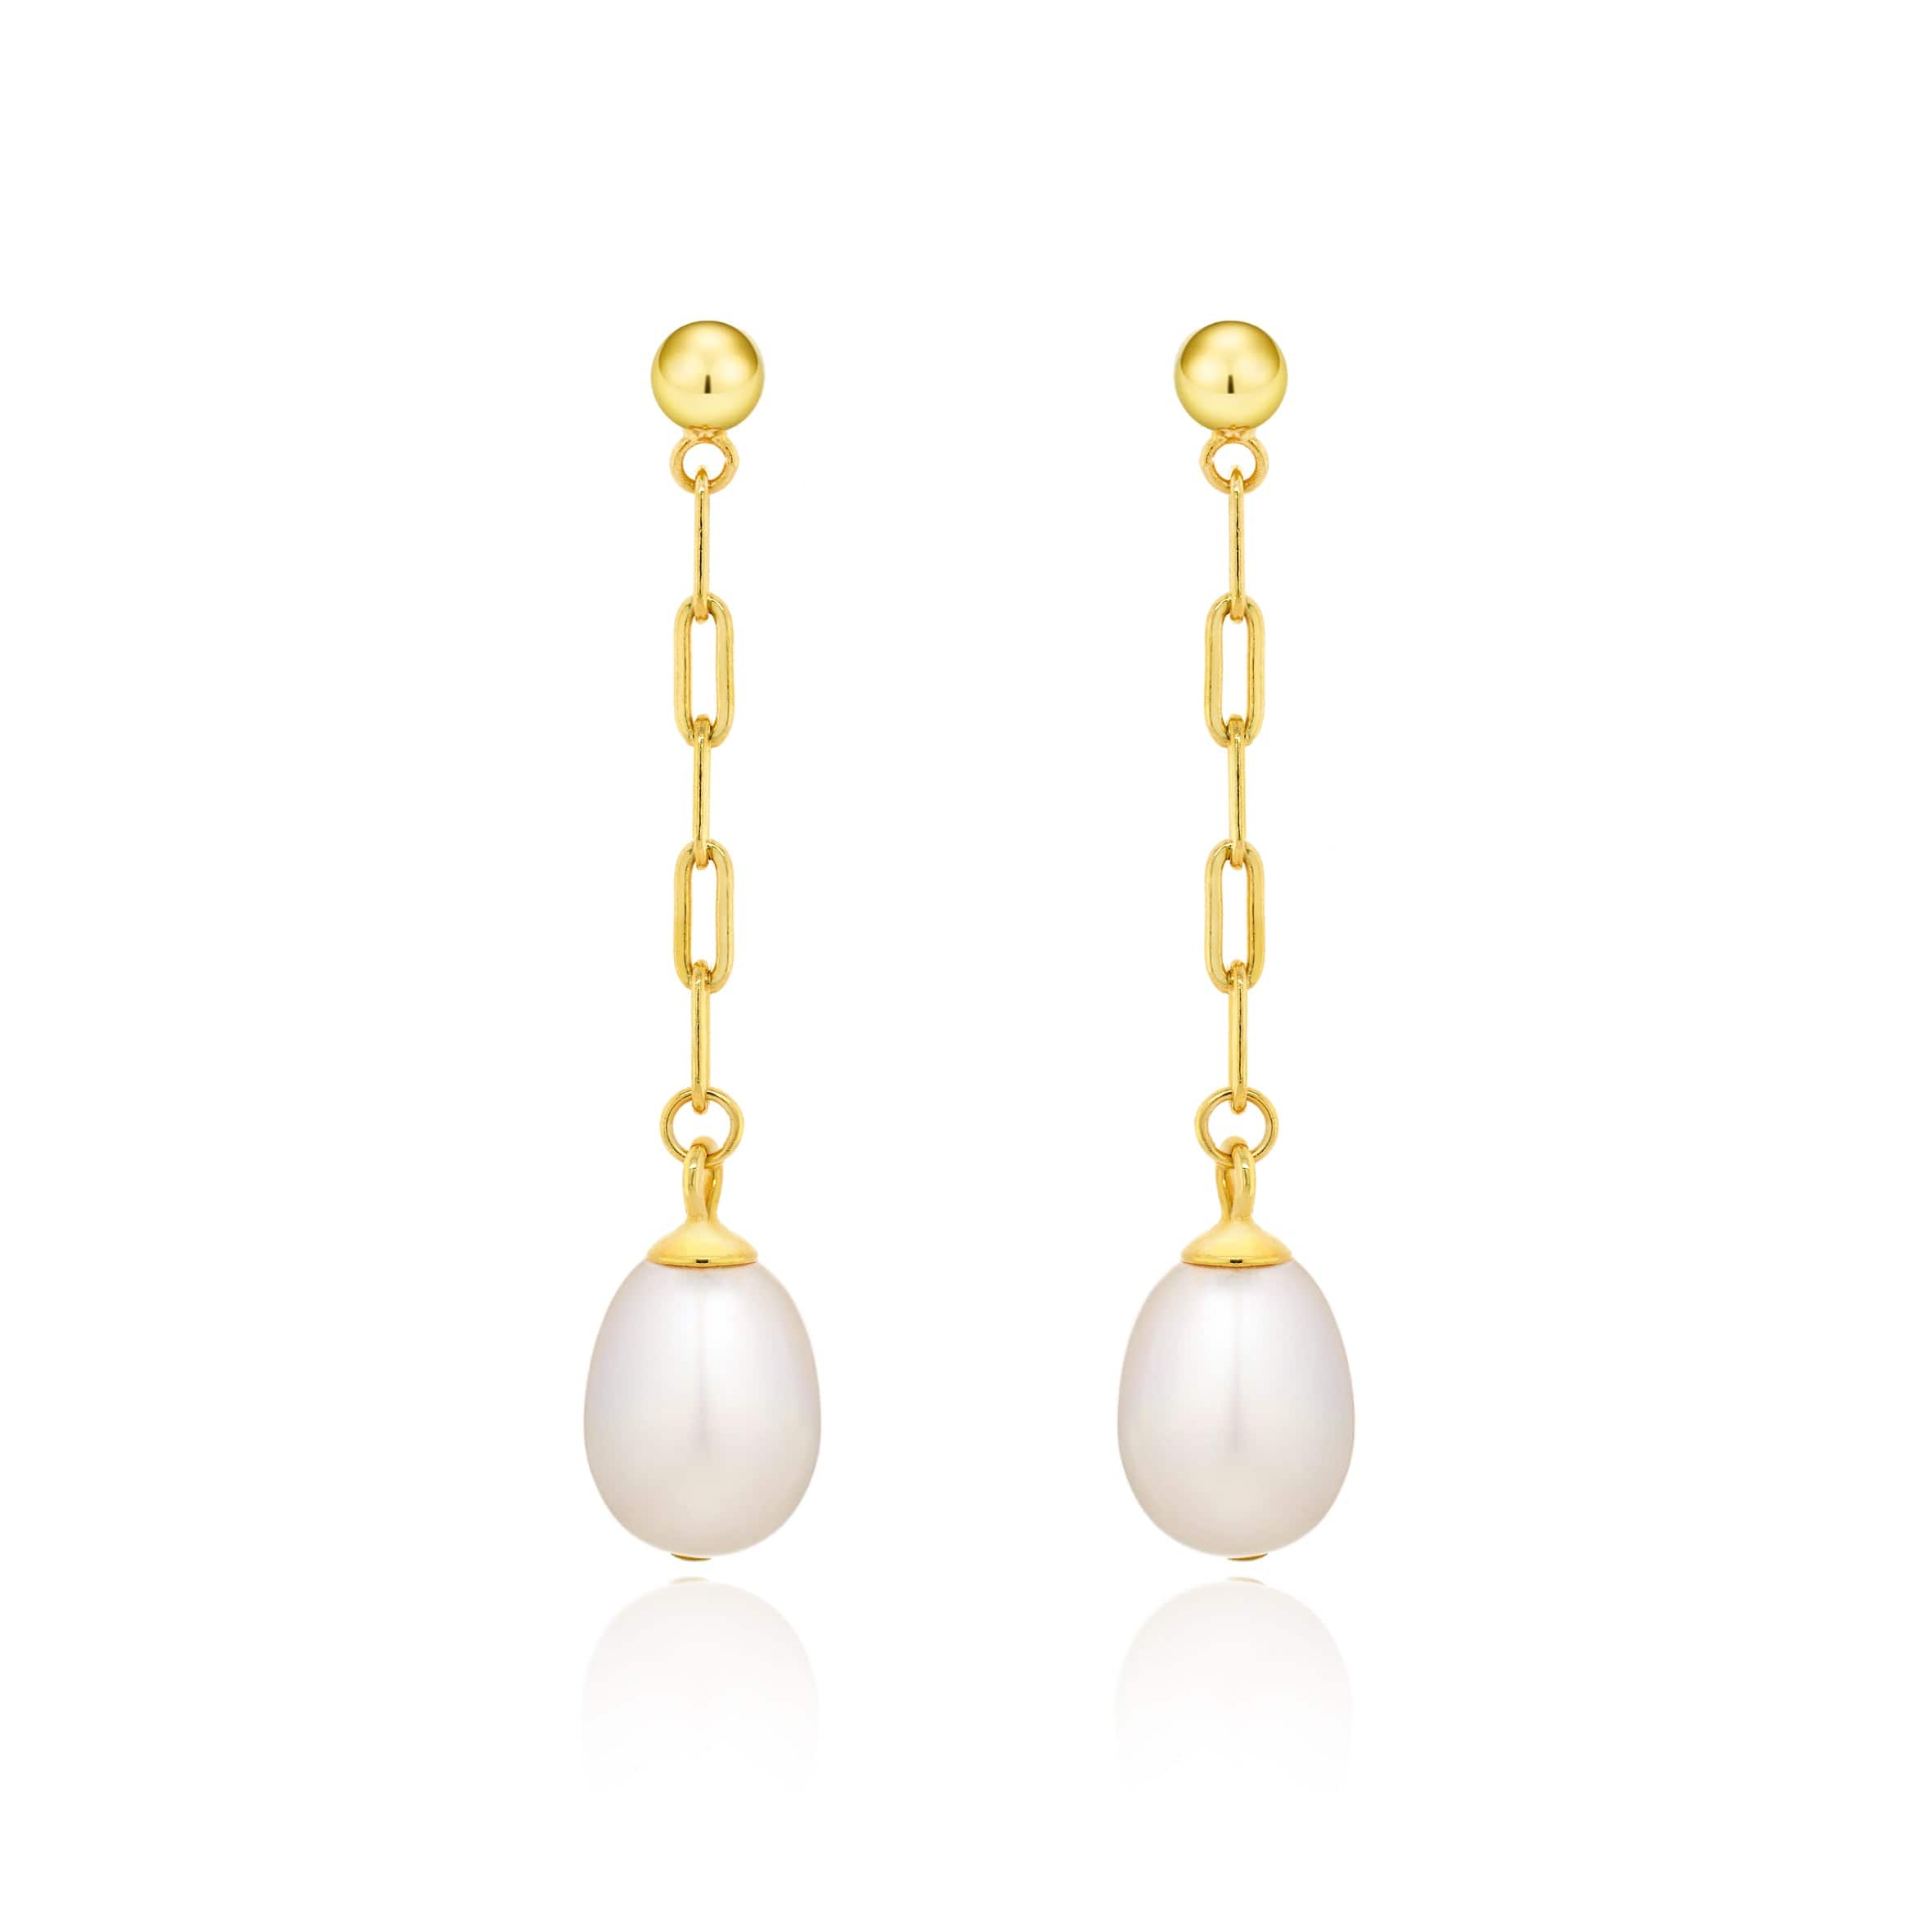 Lynora Silver Earring Gold Plated / Pearl Gold Chain Pearl Drop Earrings